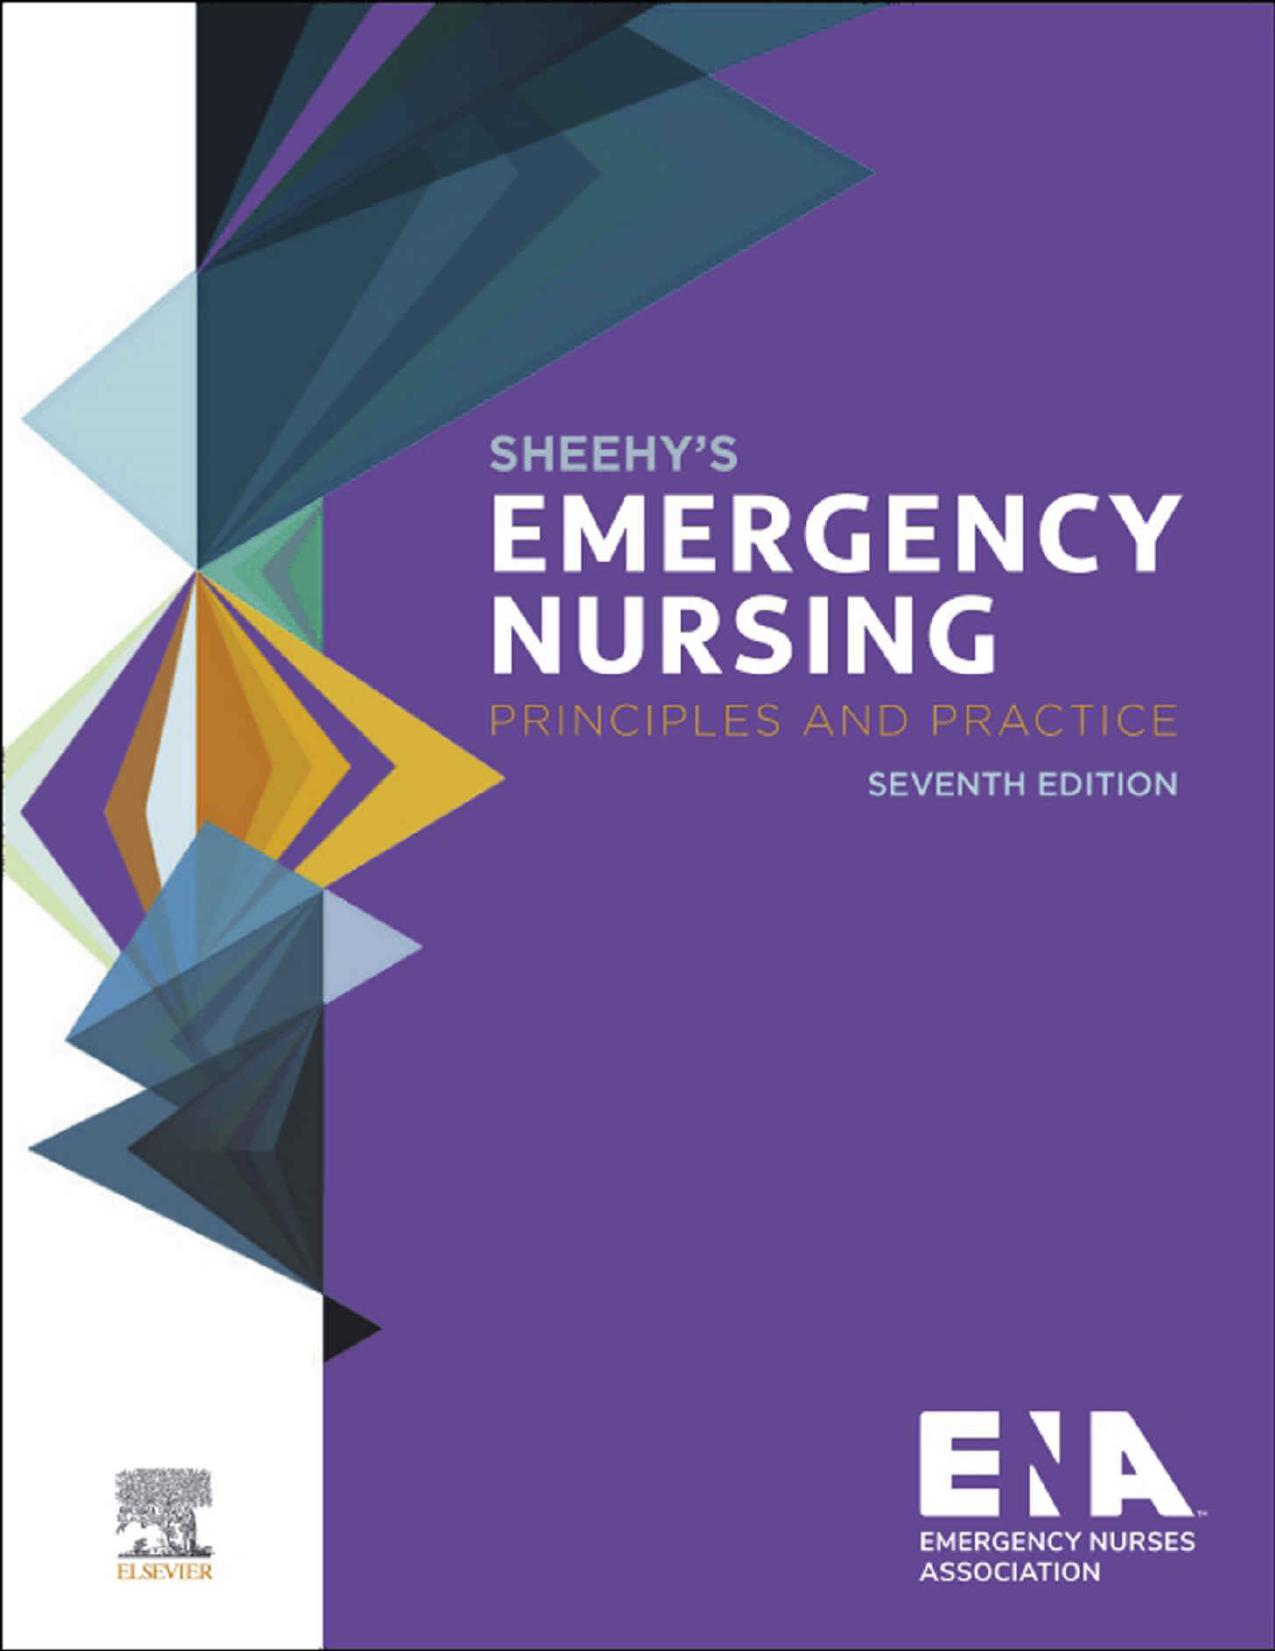 Sheehy s Emergency Nursing: Principles and Practice 7th Edition by Emergency Nurses Association